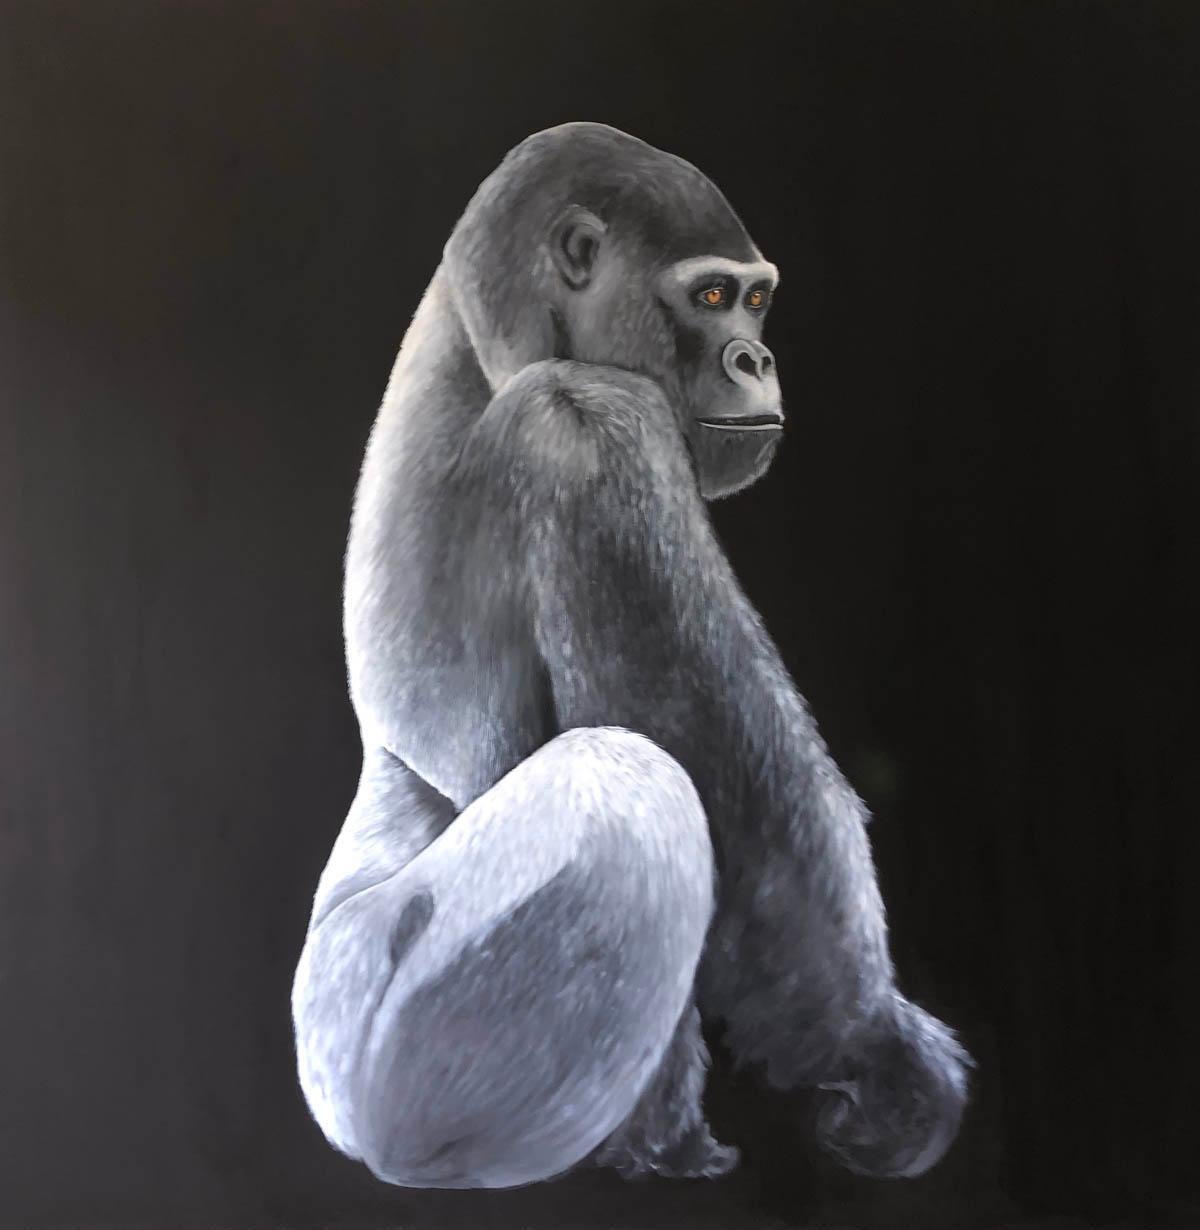 Gorilla BY ZOE LOUISE, Contemporary Painting on Board, Animal Art, Wildlife Art - Mixed Media Art by Zoe Louise